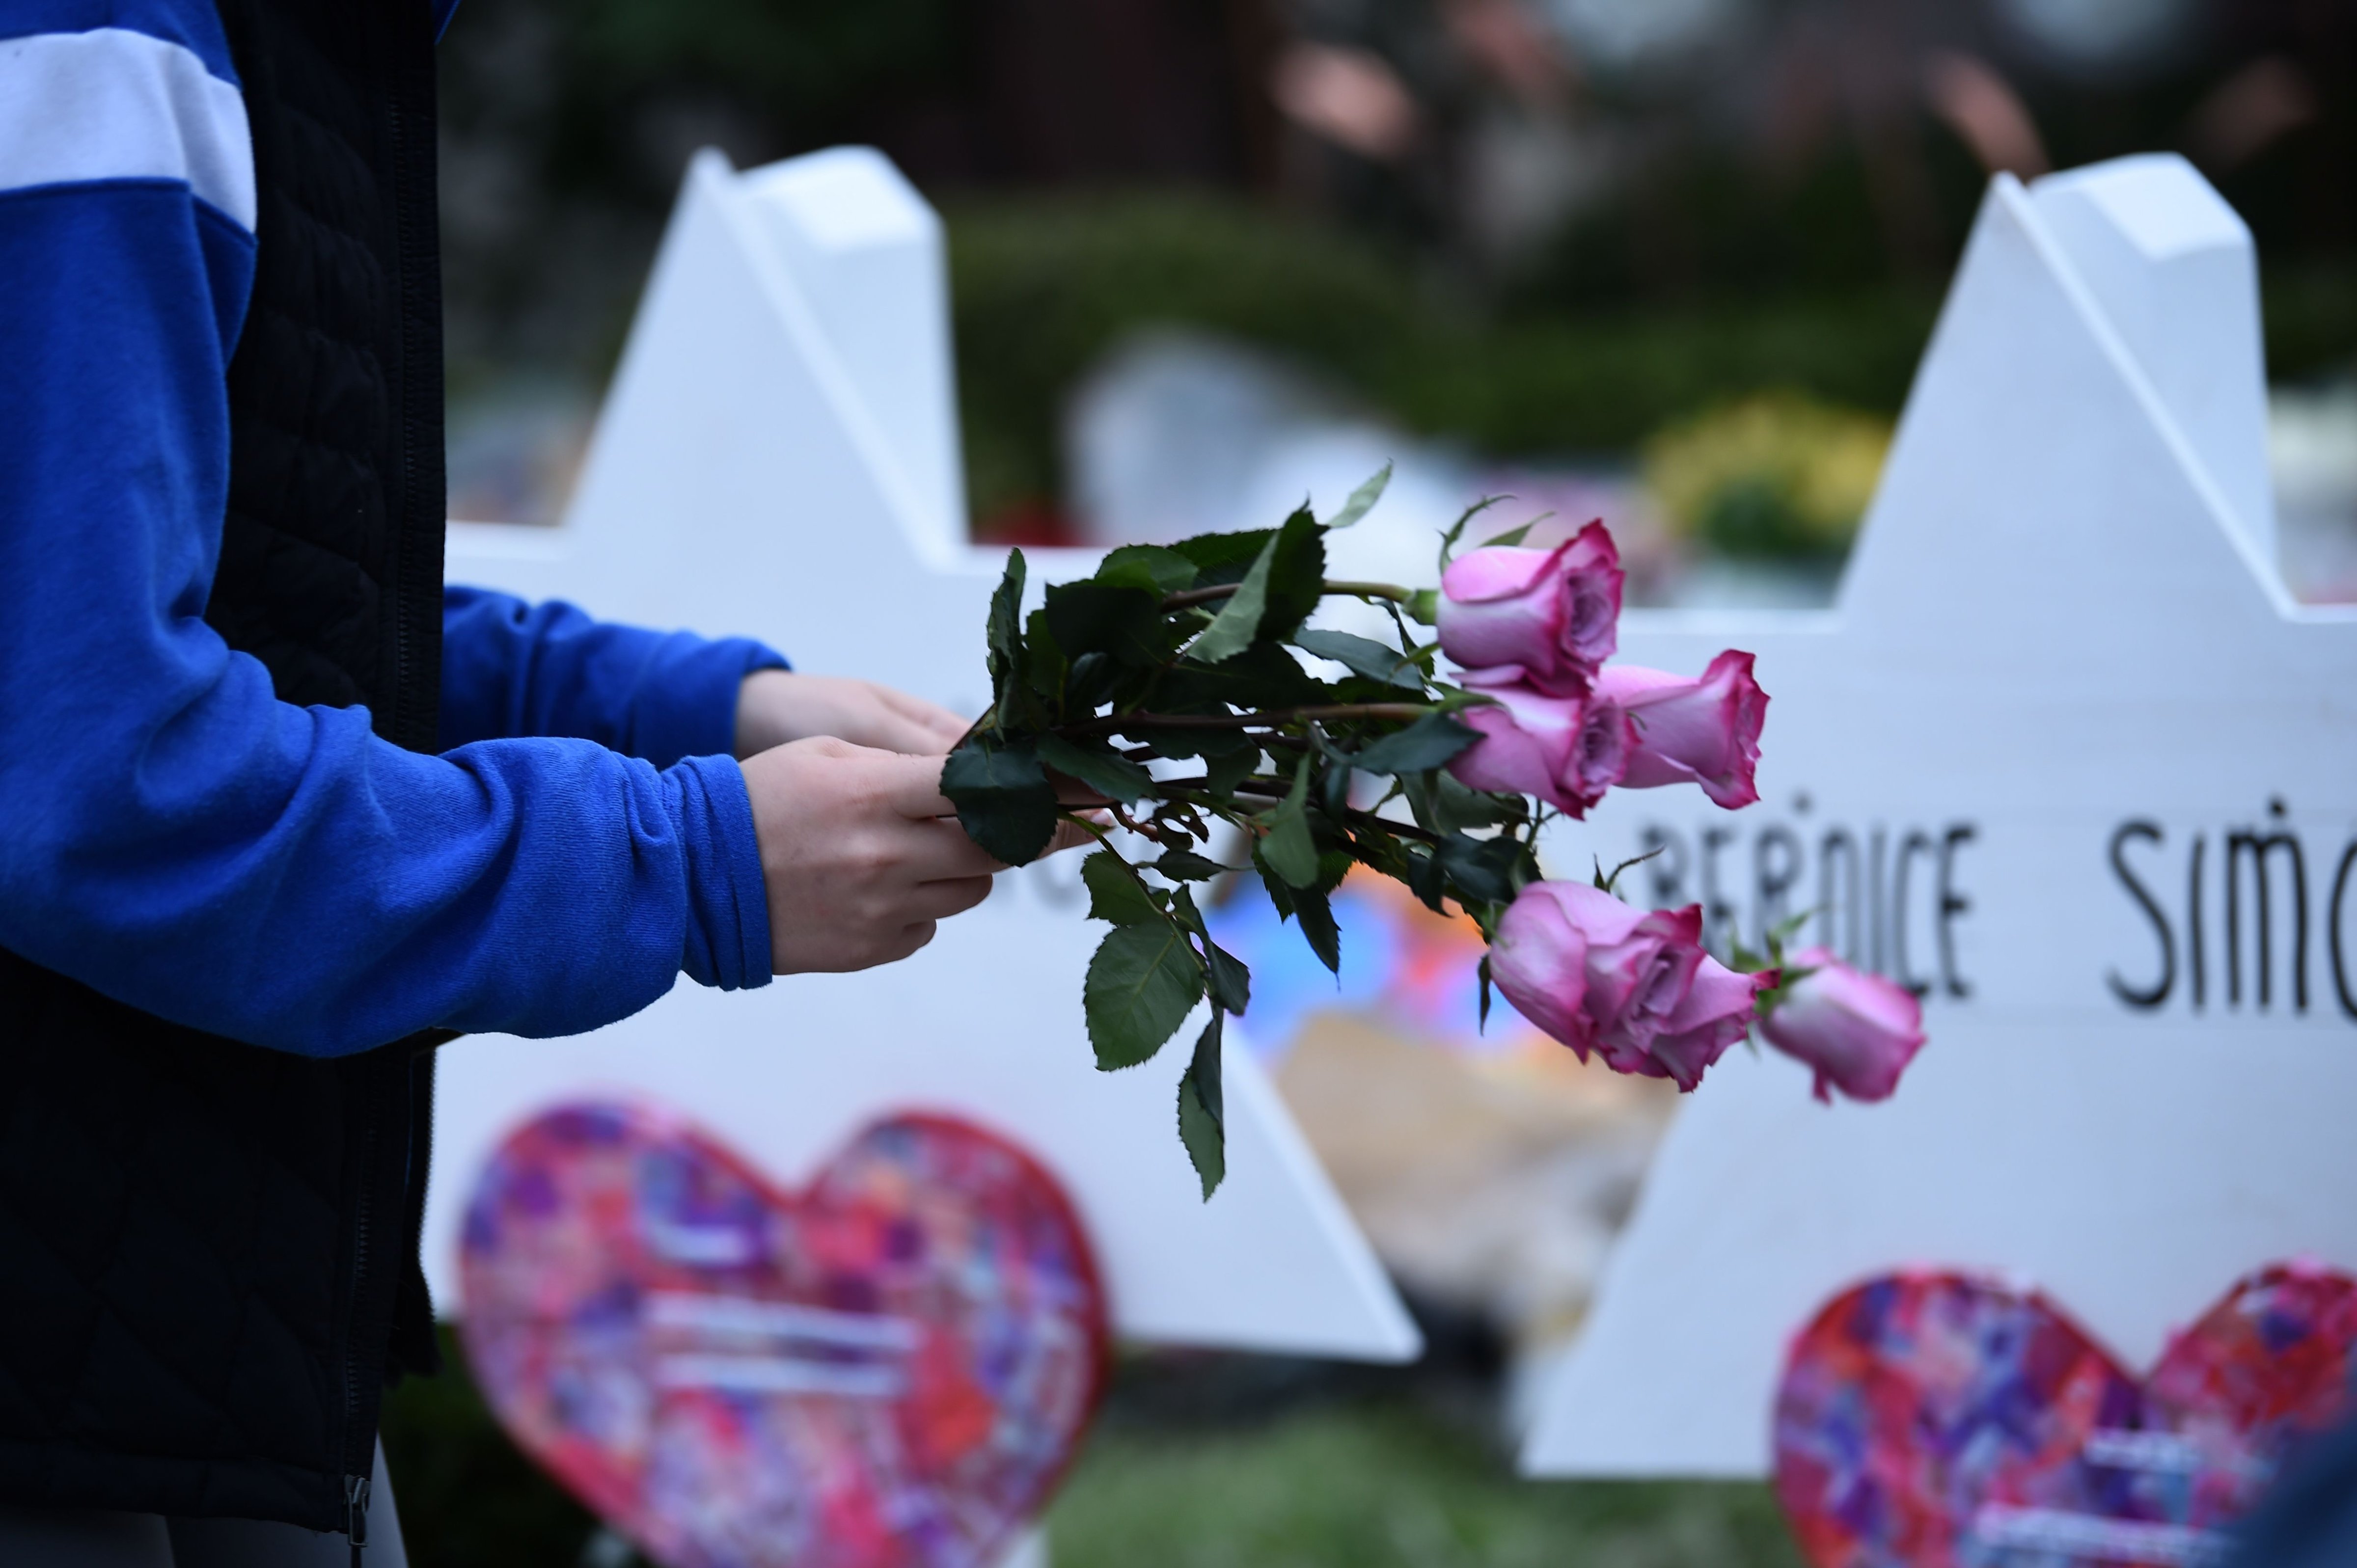 People pay their respects at a memorial outside the Tree of Life synagogue after a shooting there left 11 people dead in the Squirrel Hill neighborhood of Pittsburgh, Pennsylvania on October 29, 2018. Bernice and Sylvan Simon, married 62 years, were laid to rest Thursday. (BRENDAN SMIALOWSKI—AFP/Getty Images)